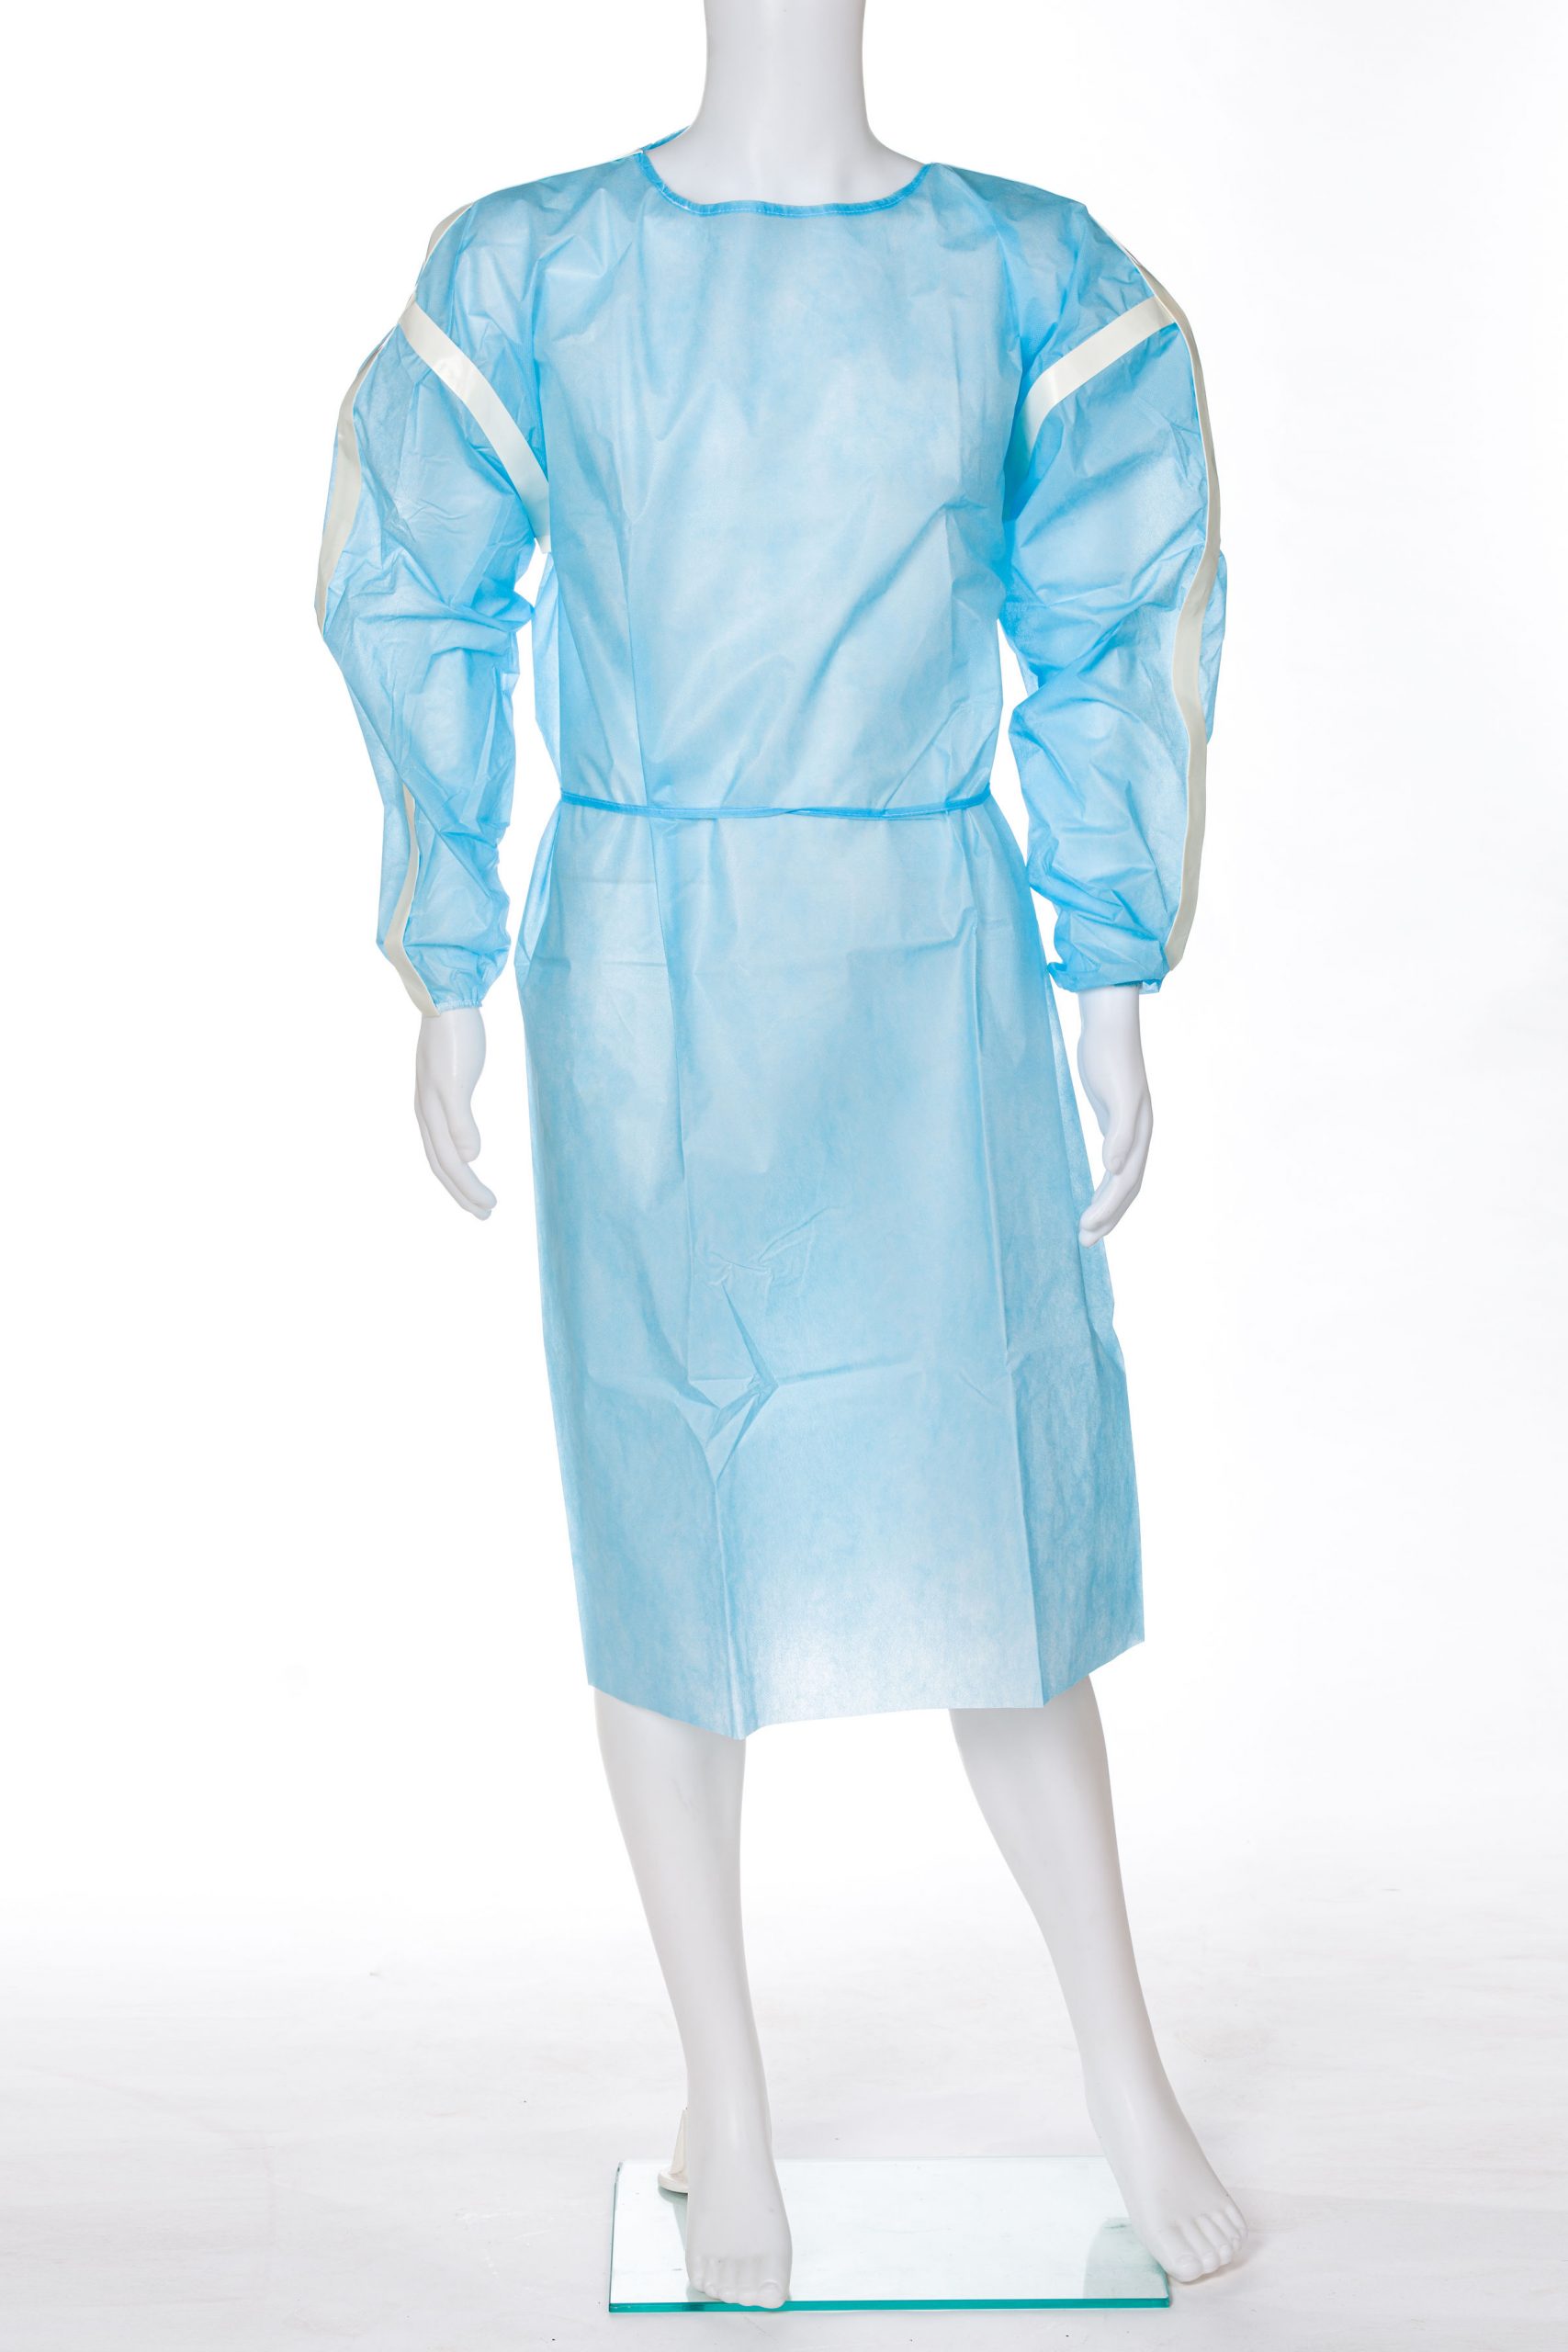 Amazon.com: Cardinal Health AAMI Level 3 NON-Sterile Surgical Gown  Convertors Non-Reinforced,Size Large,20 gowns : Industrial & Scientific